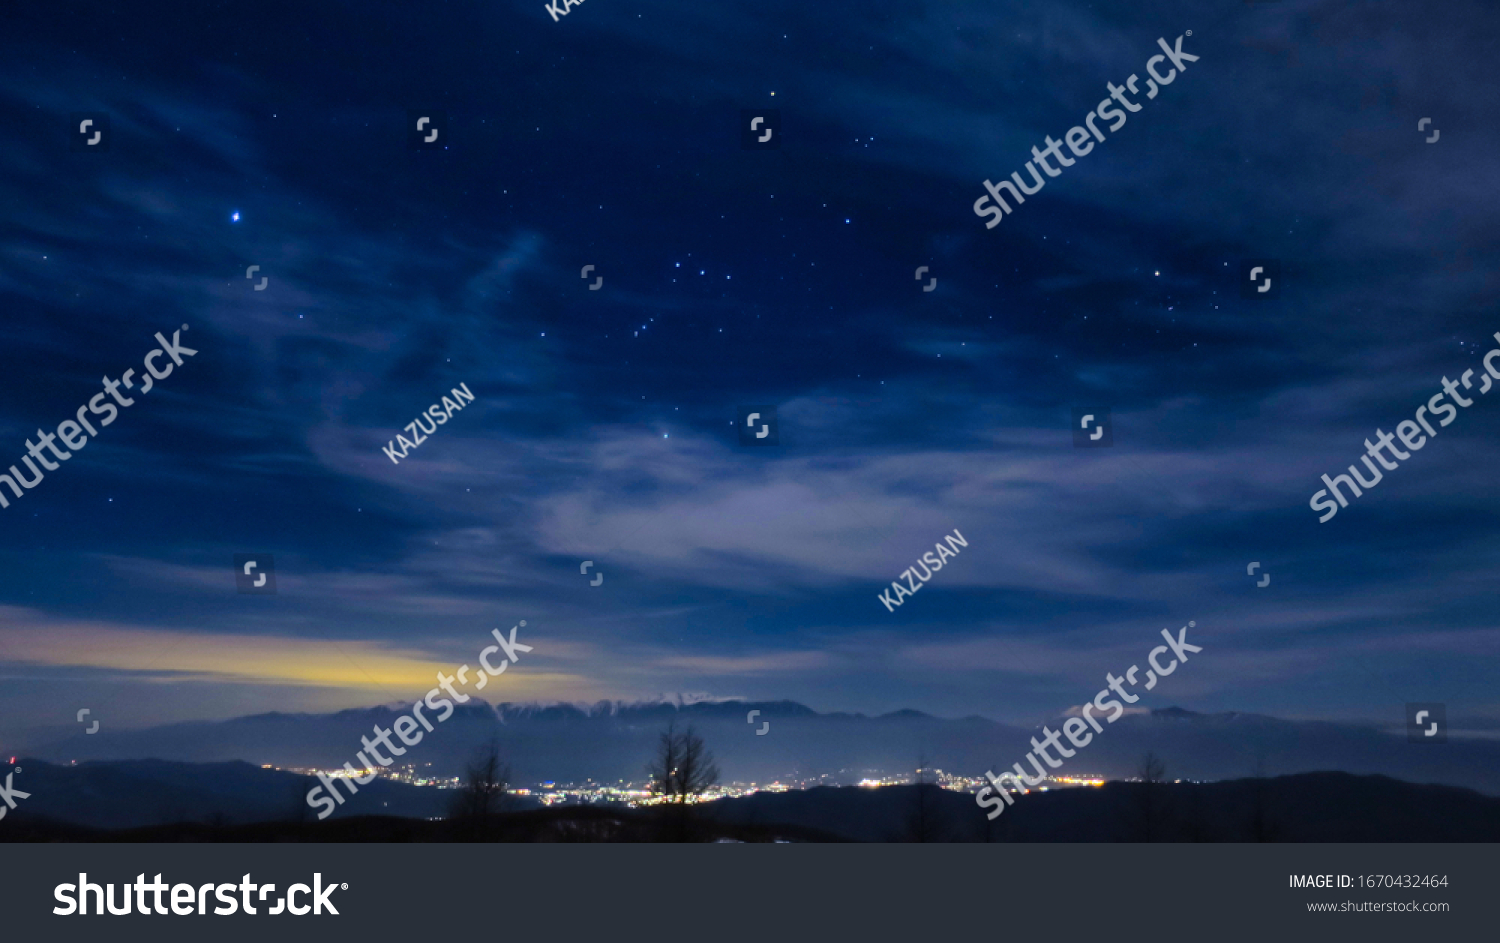 Starry sky and night view from the mountain in the Southern Alps #1670432464